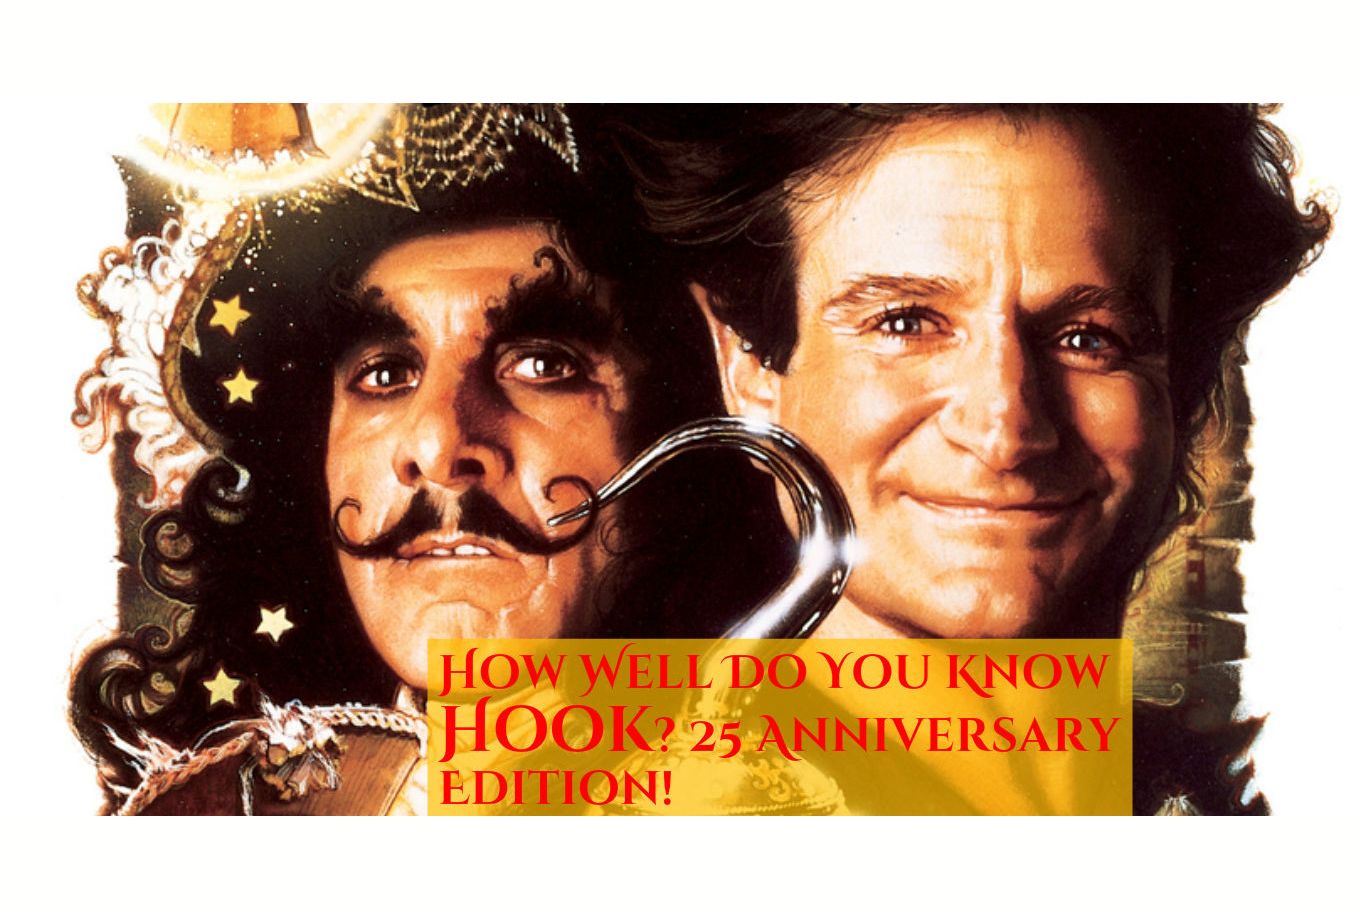 Can You Master These 25 Questions For HOOK's 25th Anniversary?